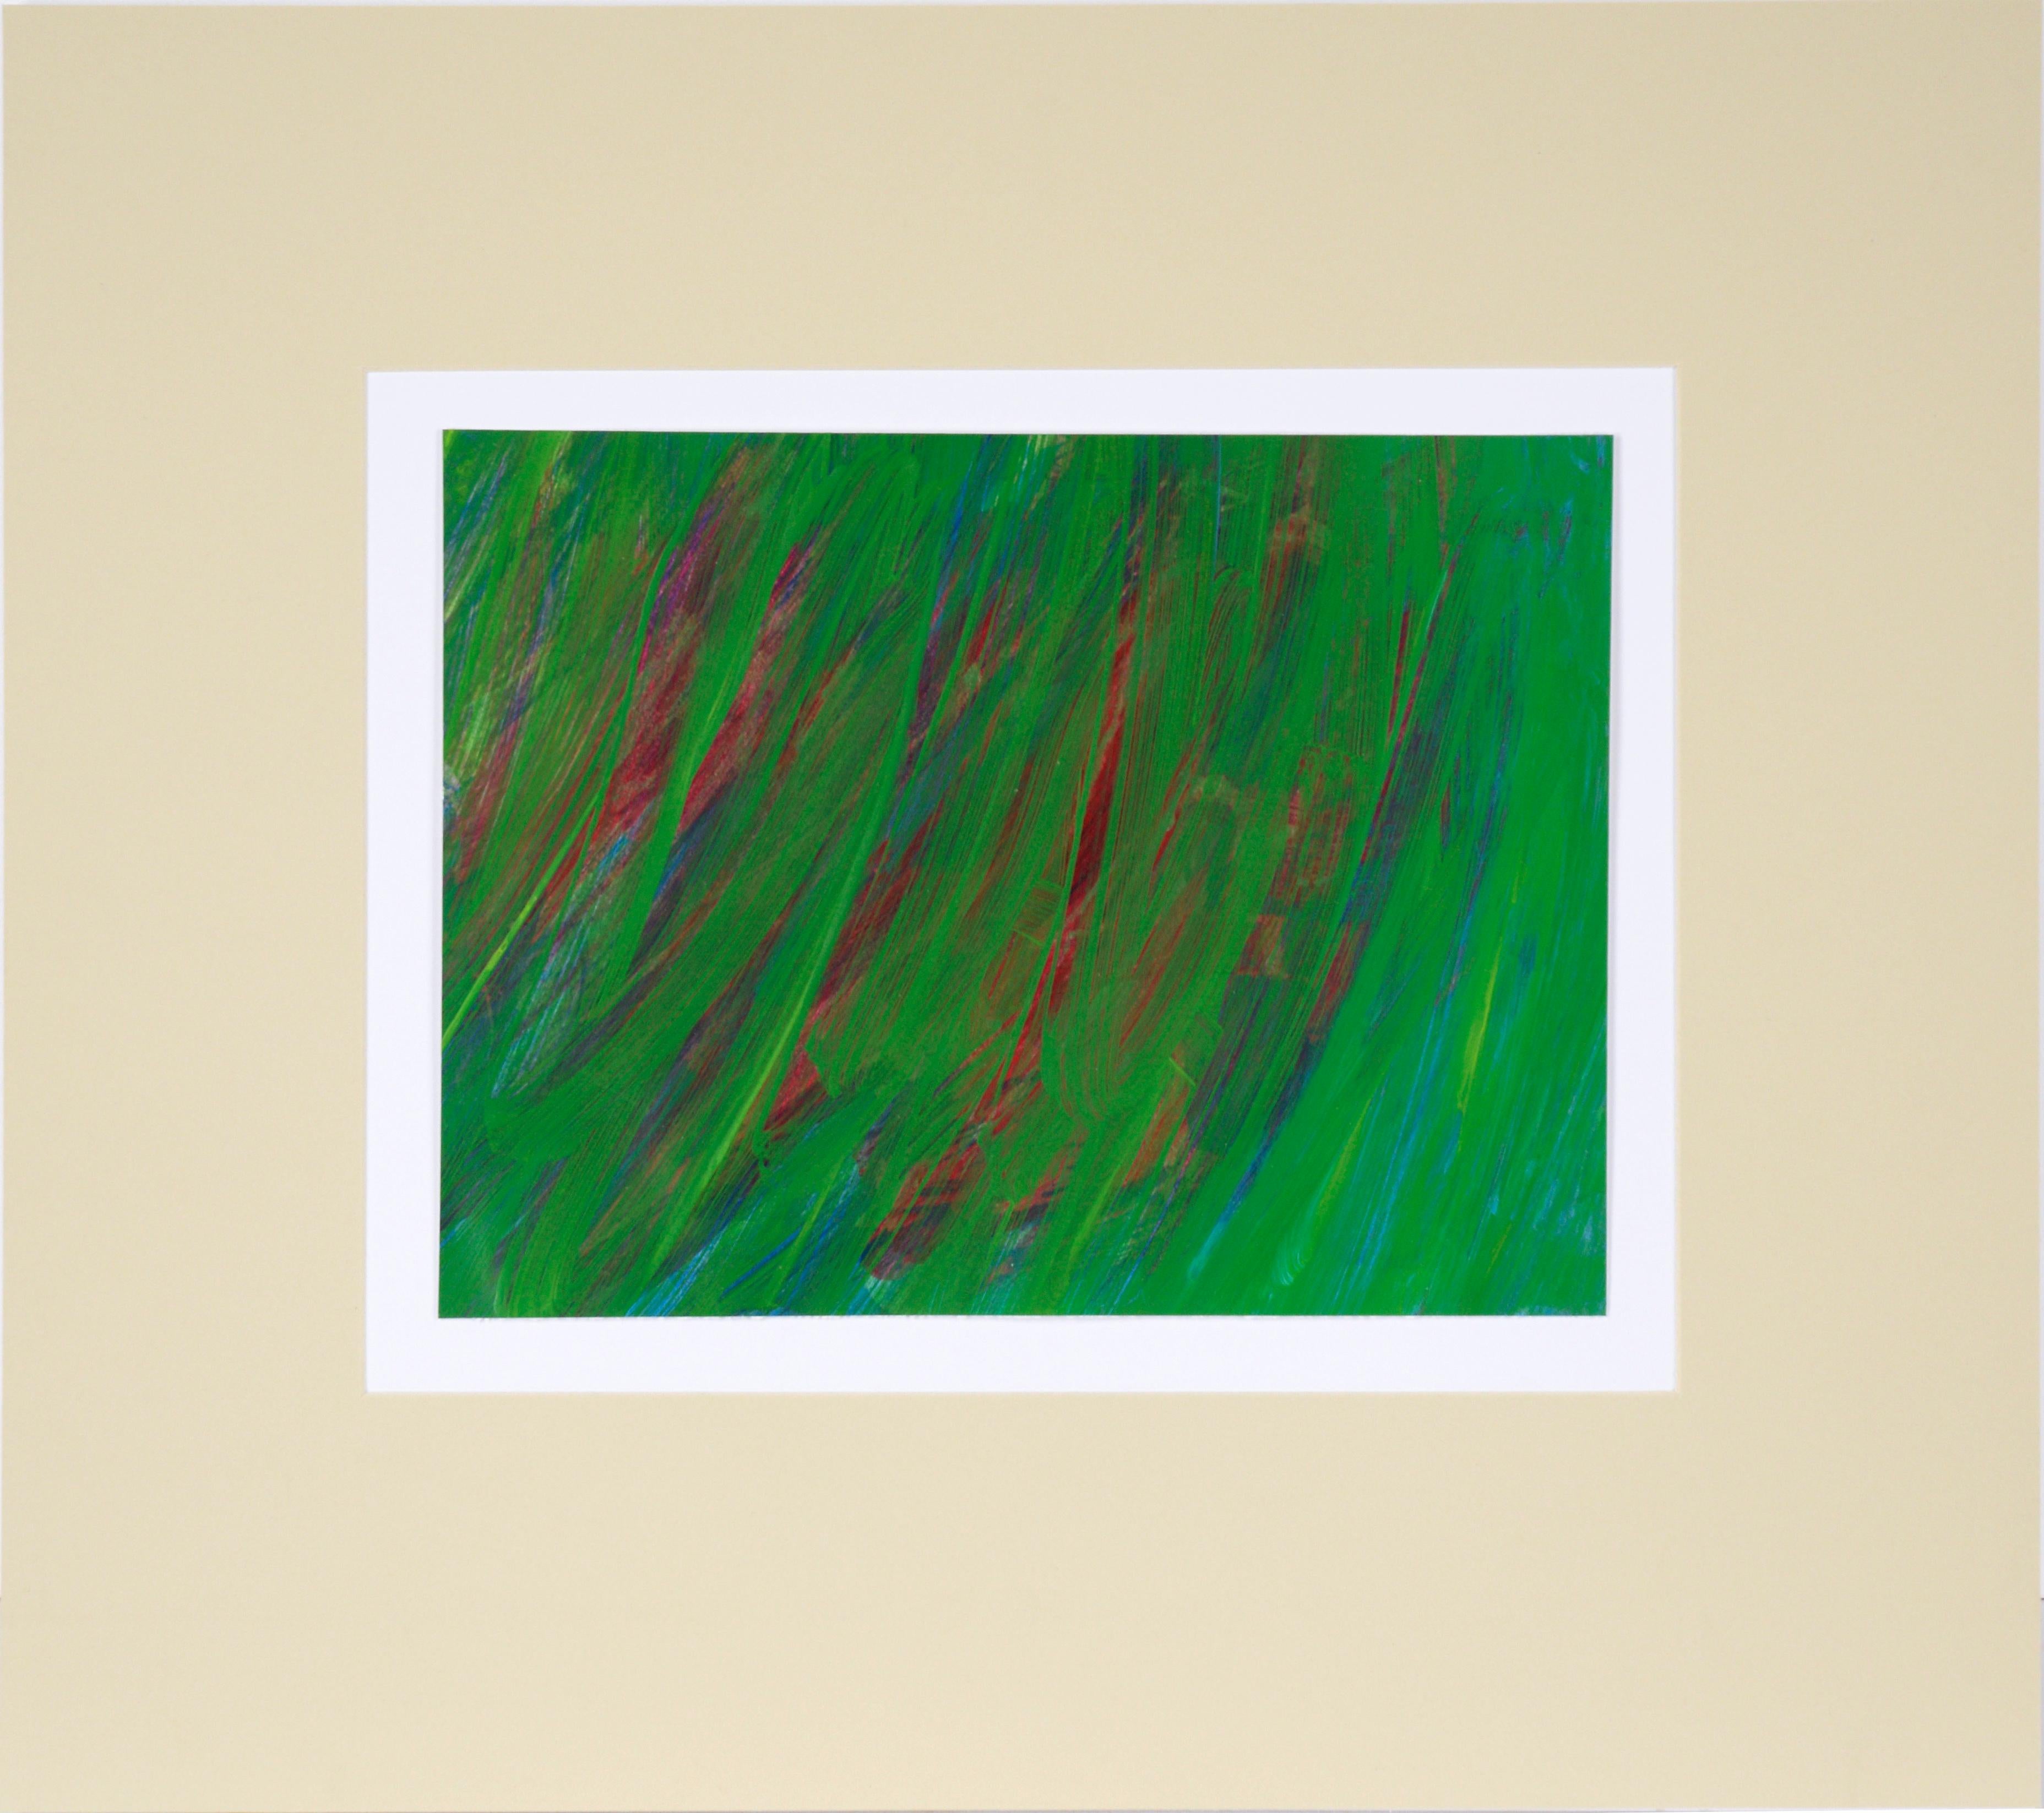 Ian Scowcroft Abstract Painting - "Green Forest" Abstract Expressionist Outsider Art in Acrylic on Paper